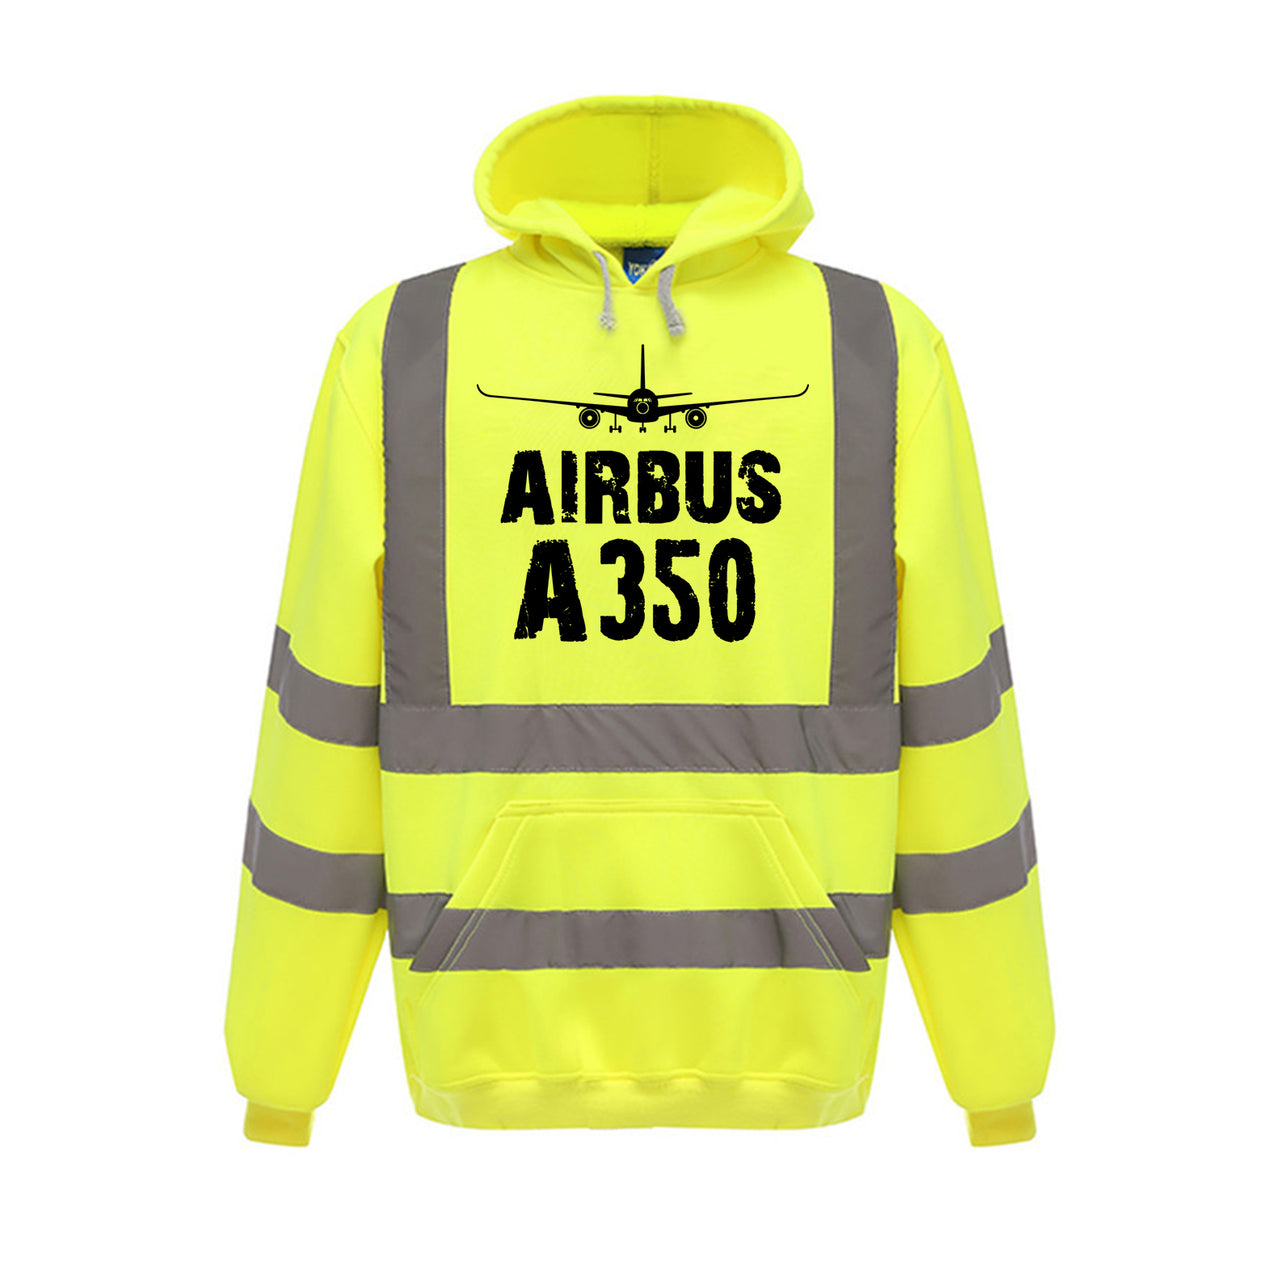 Airbus A350 & Plane Designed Reflective Hoodies